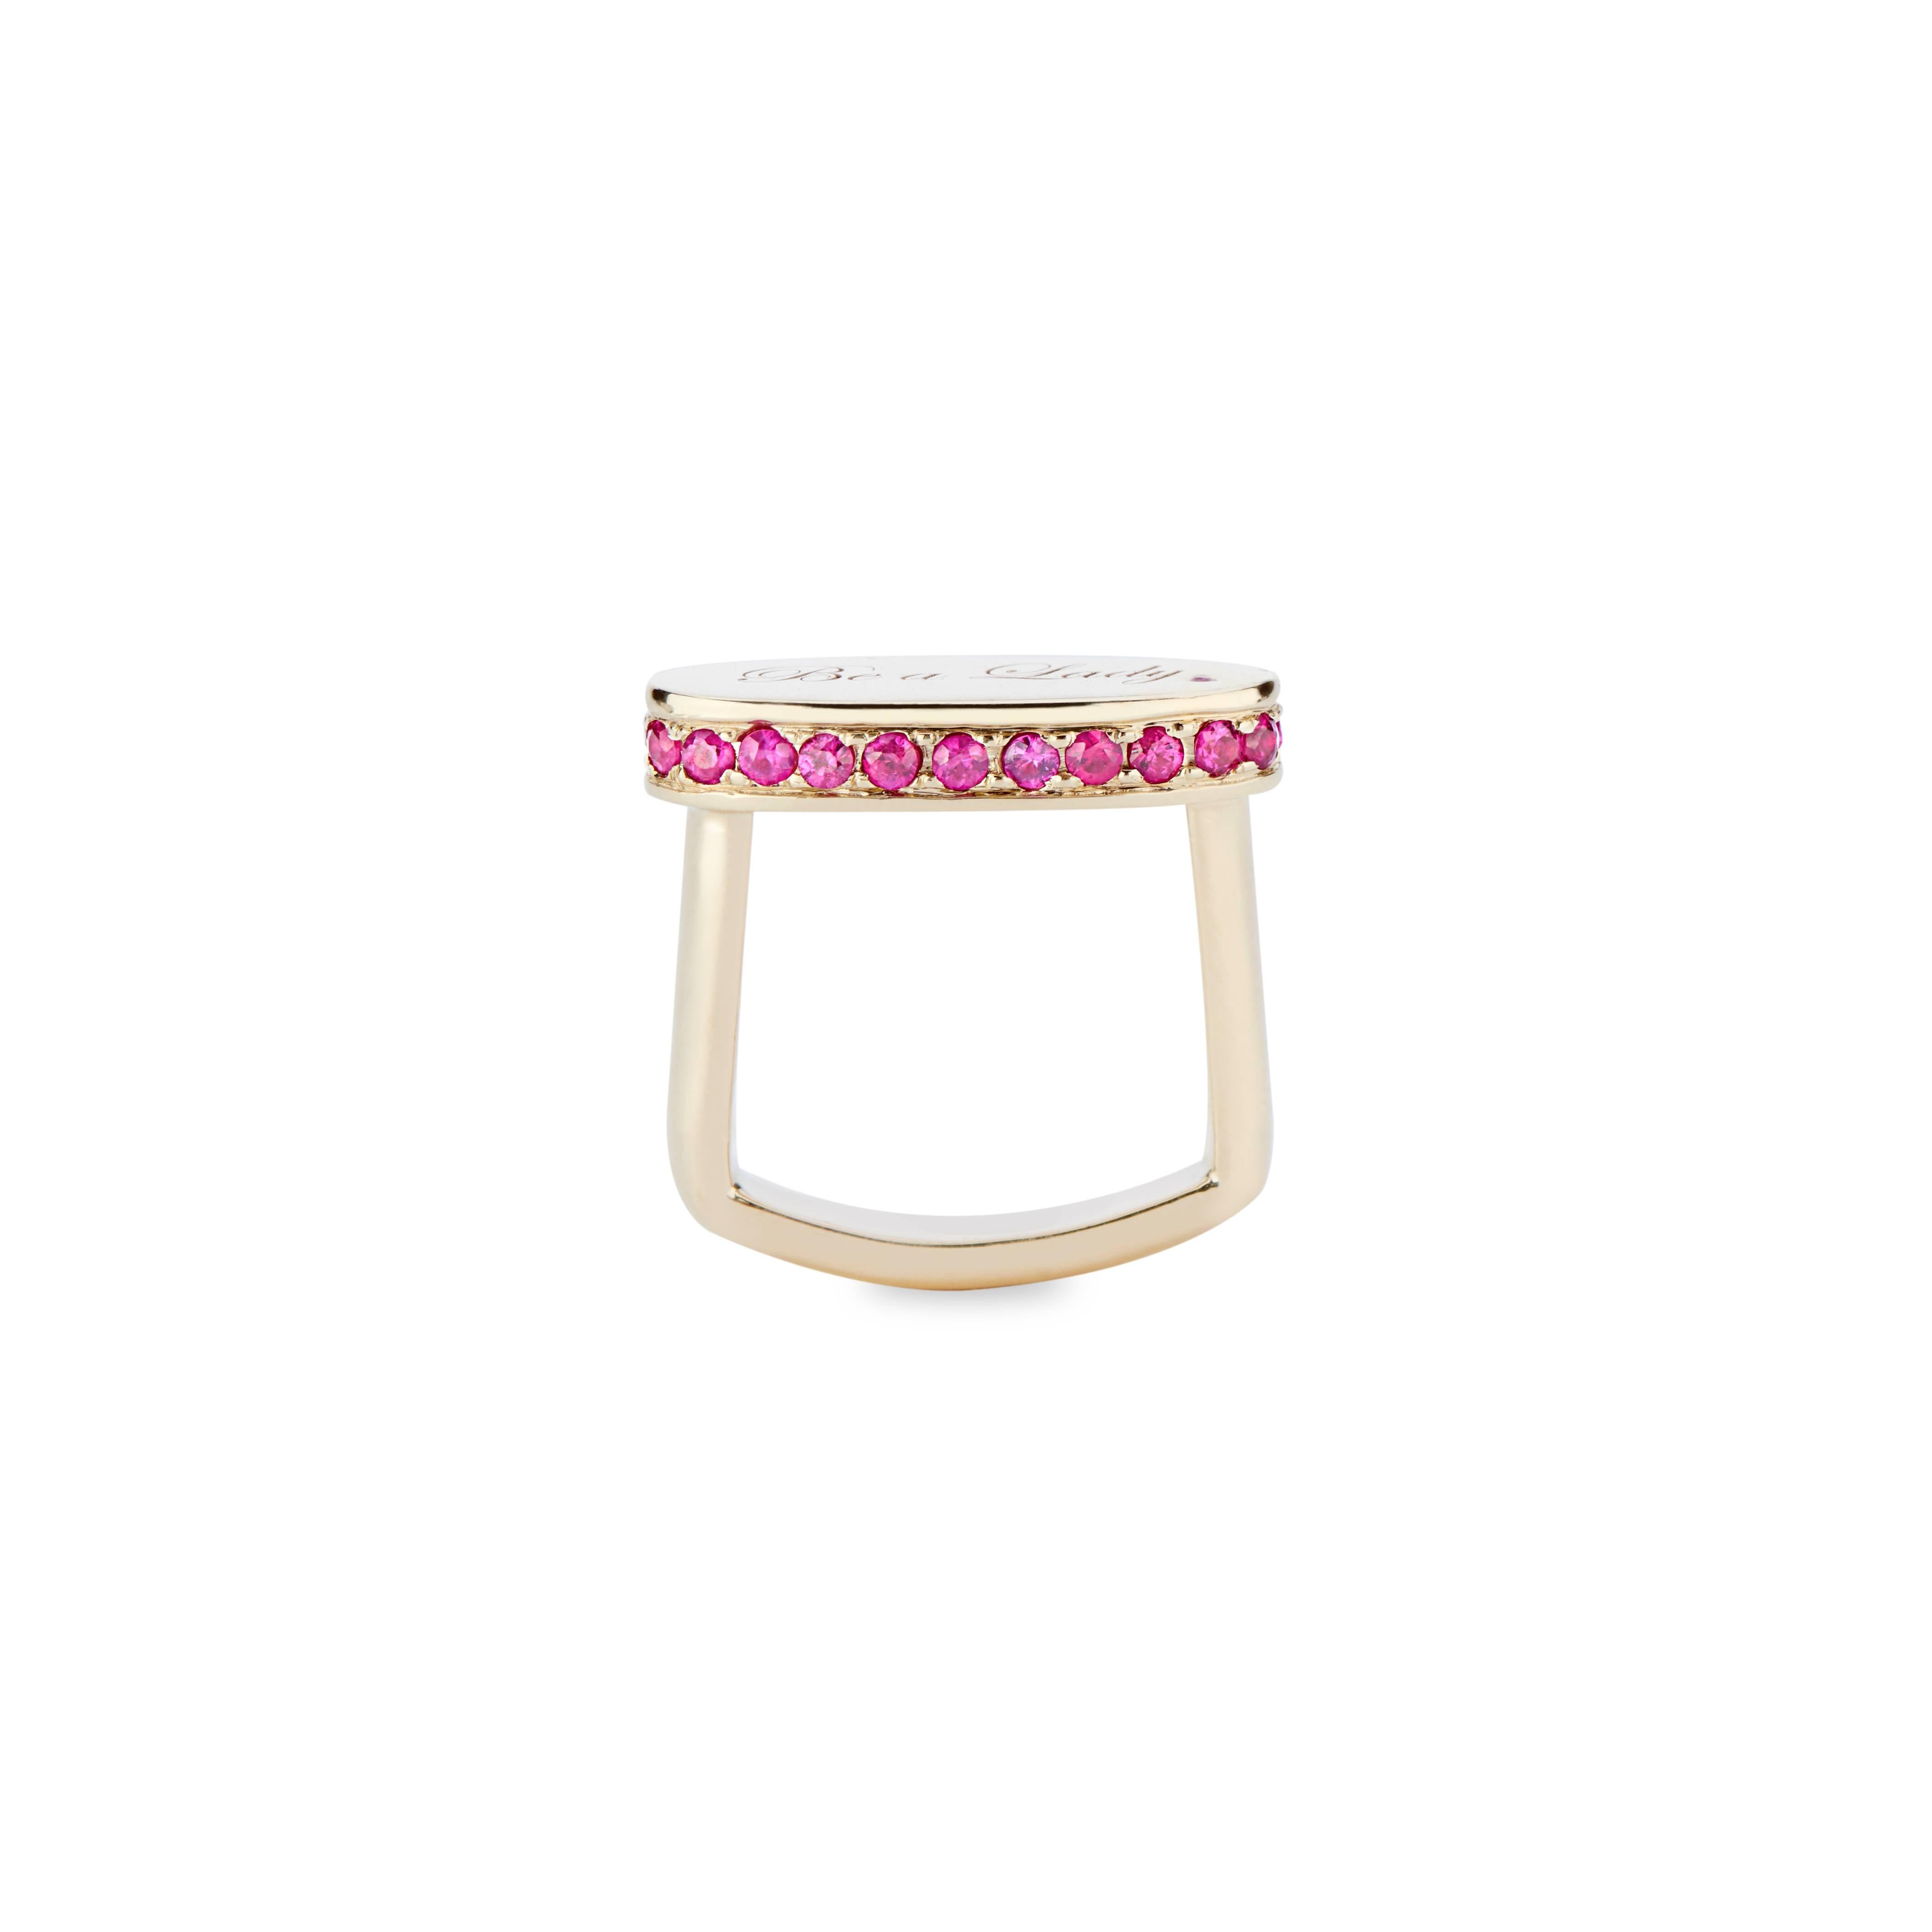 This 14k gold and pink sapphire signet engraved with 